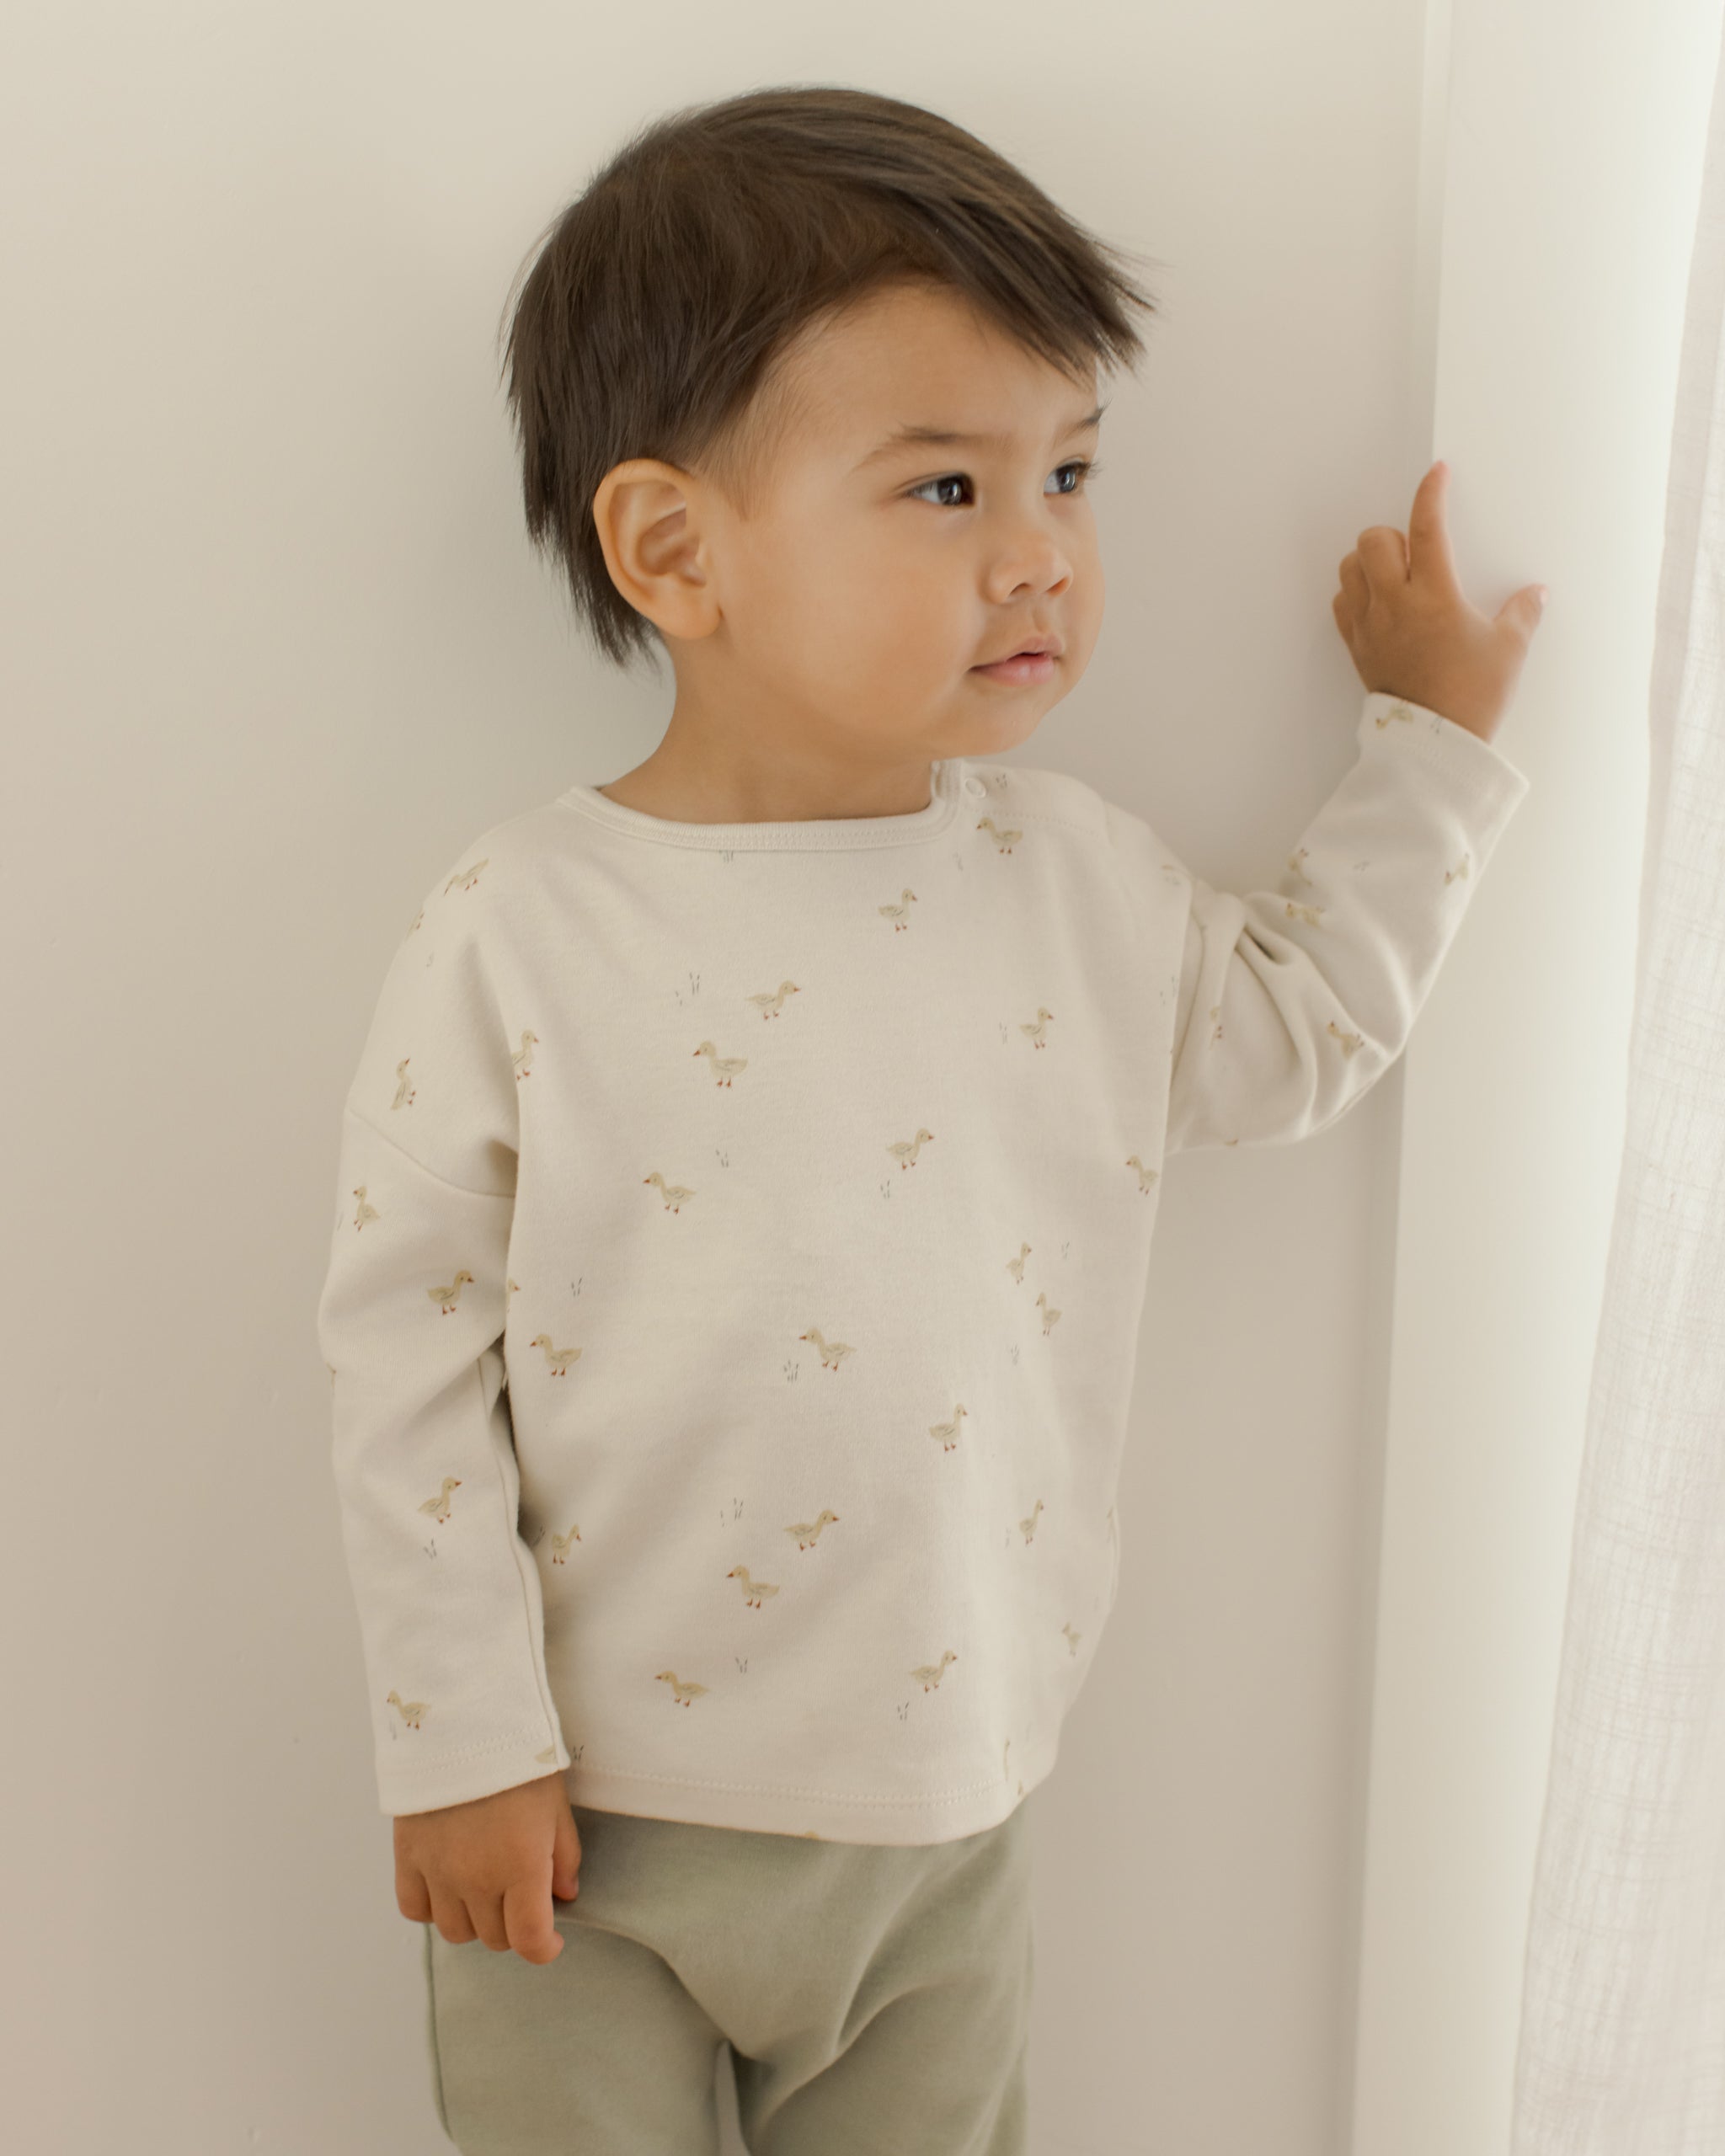 Long Sleeve Tee || Ducks - Rylee + Cru | Kids Clothes | Trendy Baby Clothes | Modern Infant Outfits |